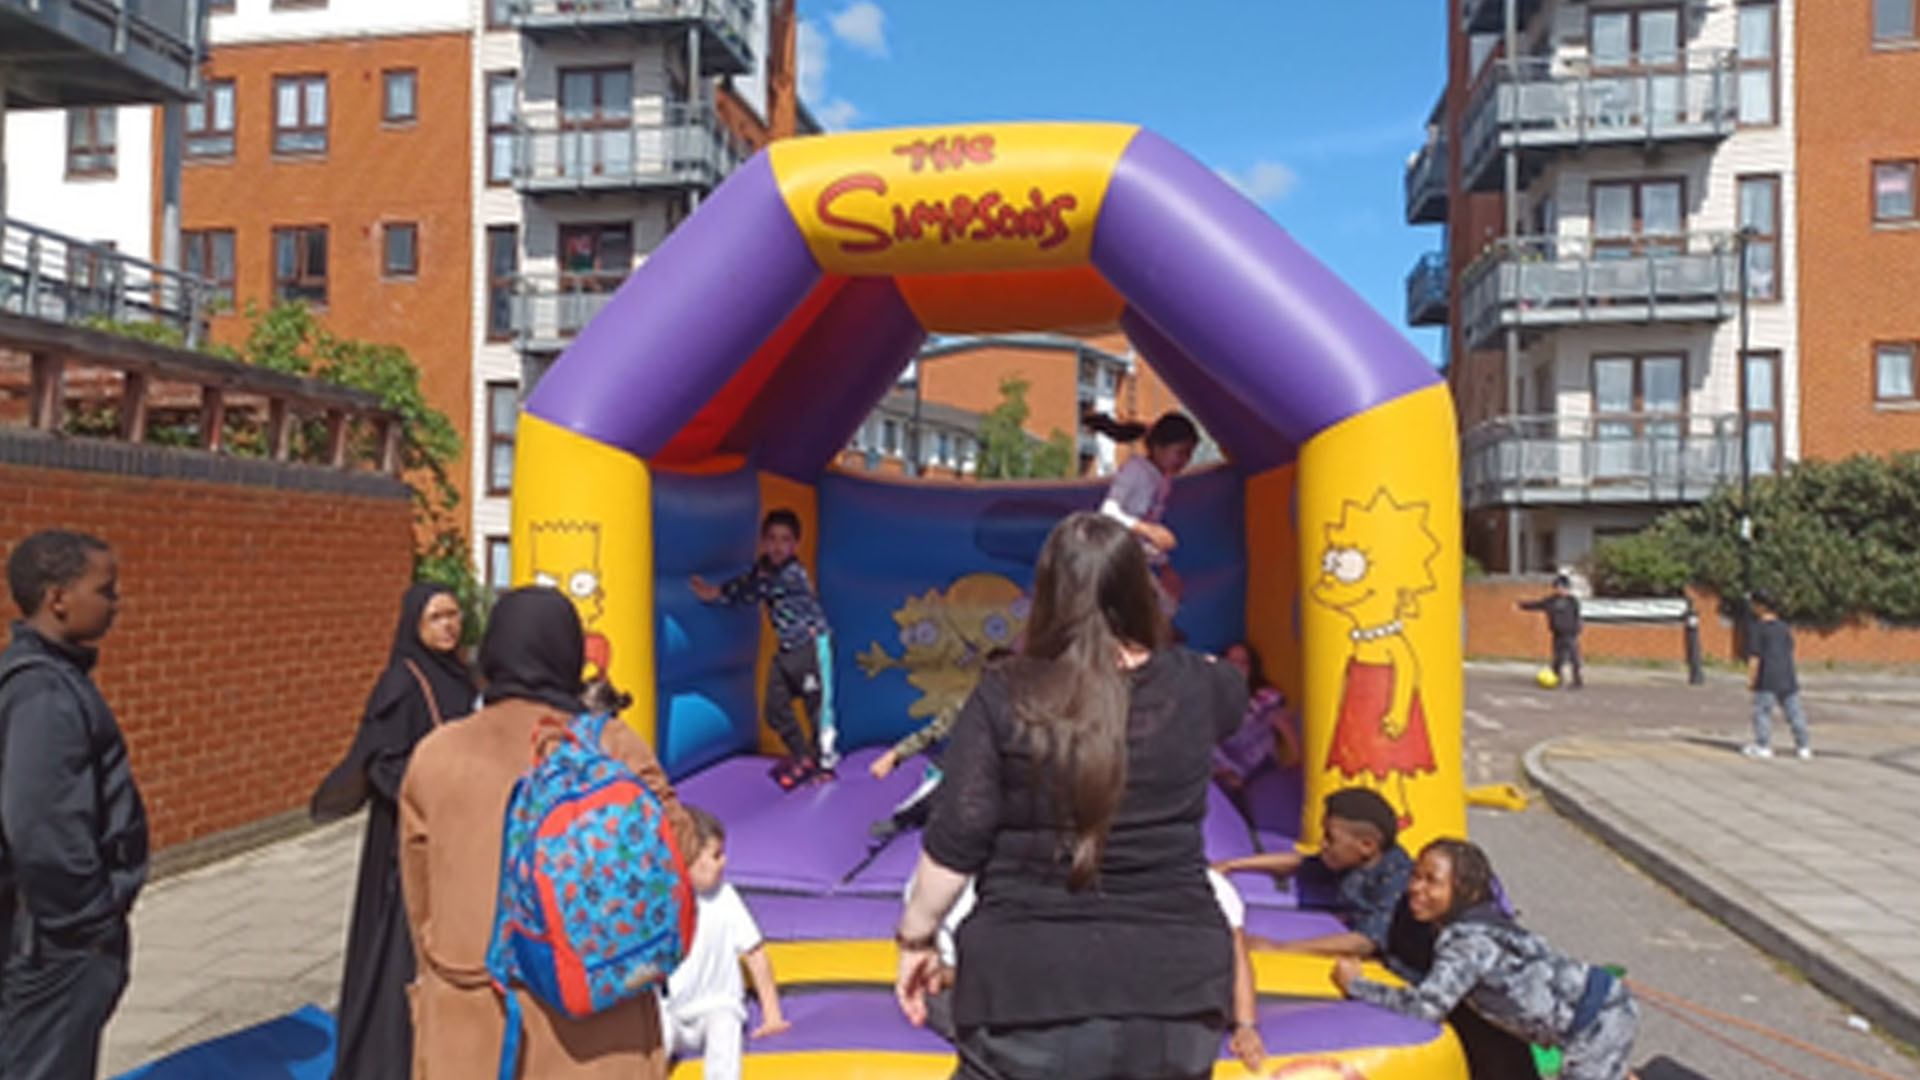 Simpsons decorated bouncy castle with people on